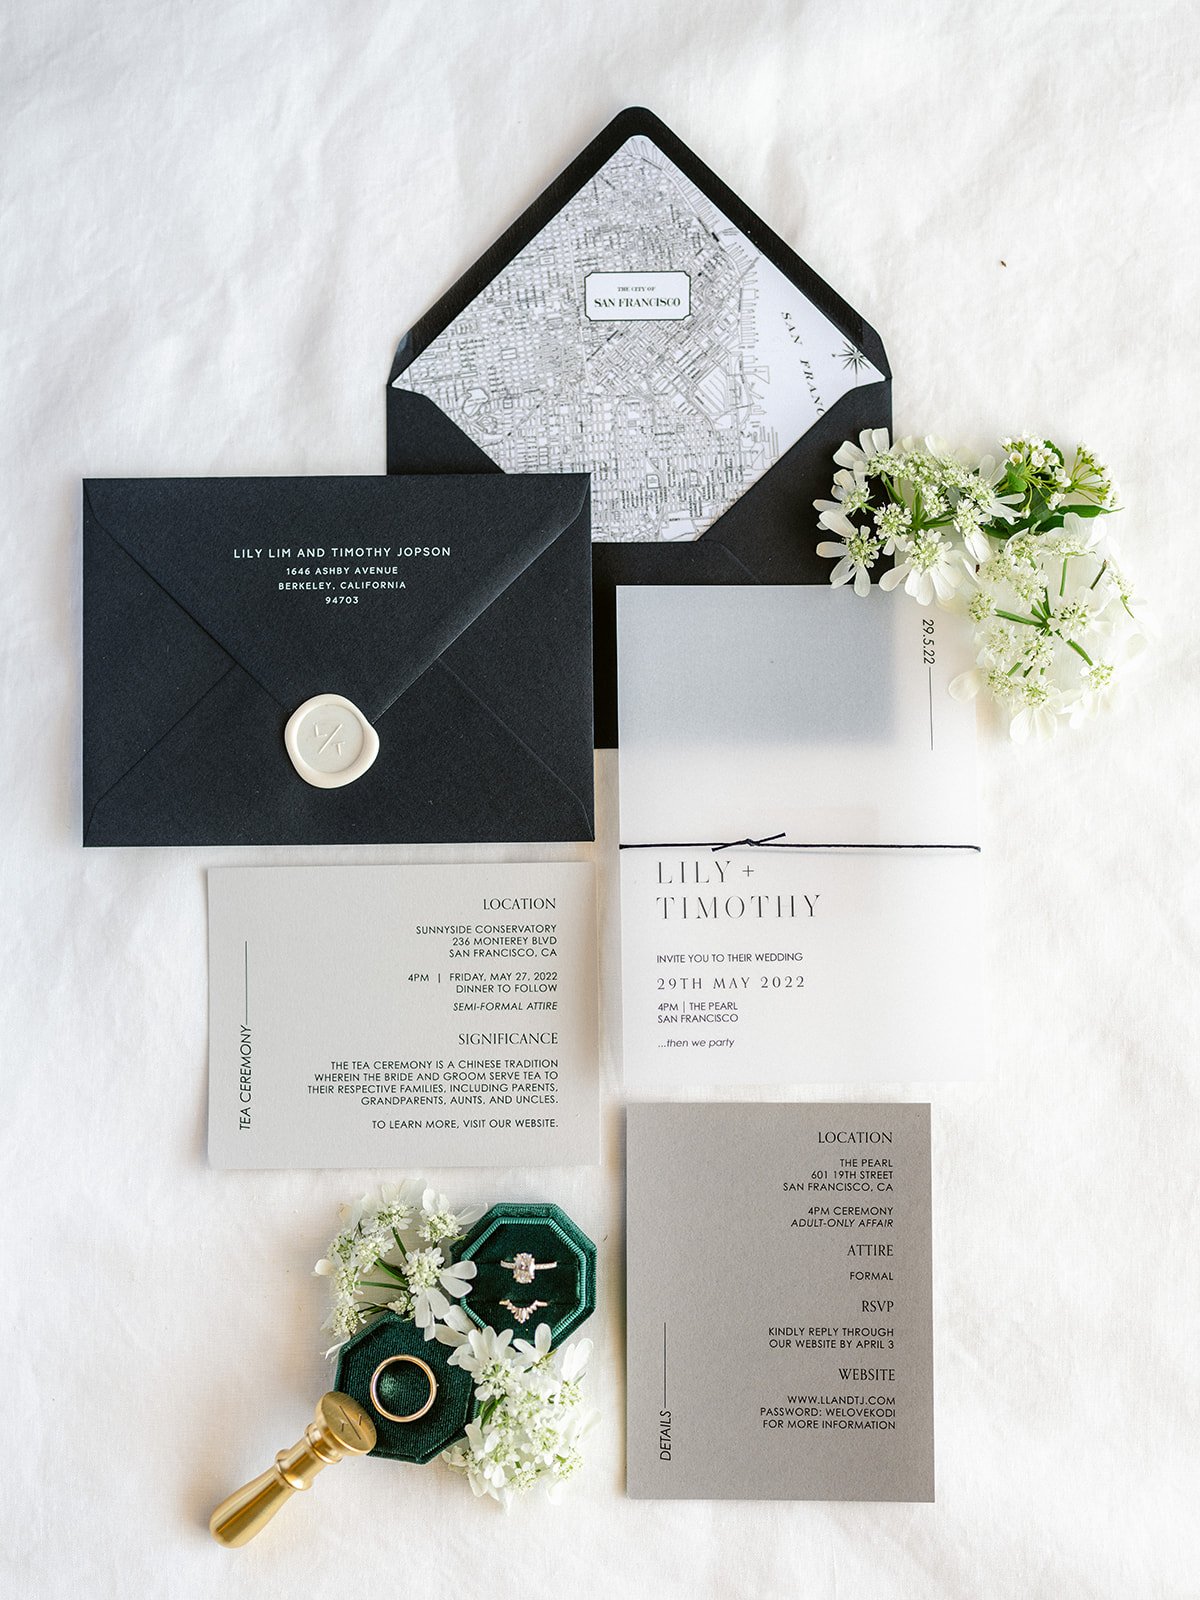 modern black and white wedding invitations in this San Francisco real wedding featuring a anais anette wedding dress from aandbe bridal shop